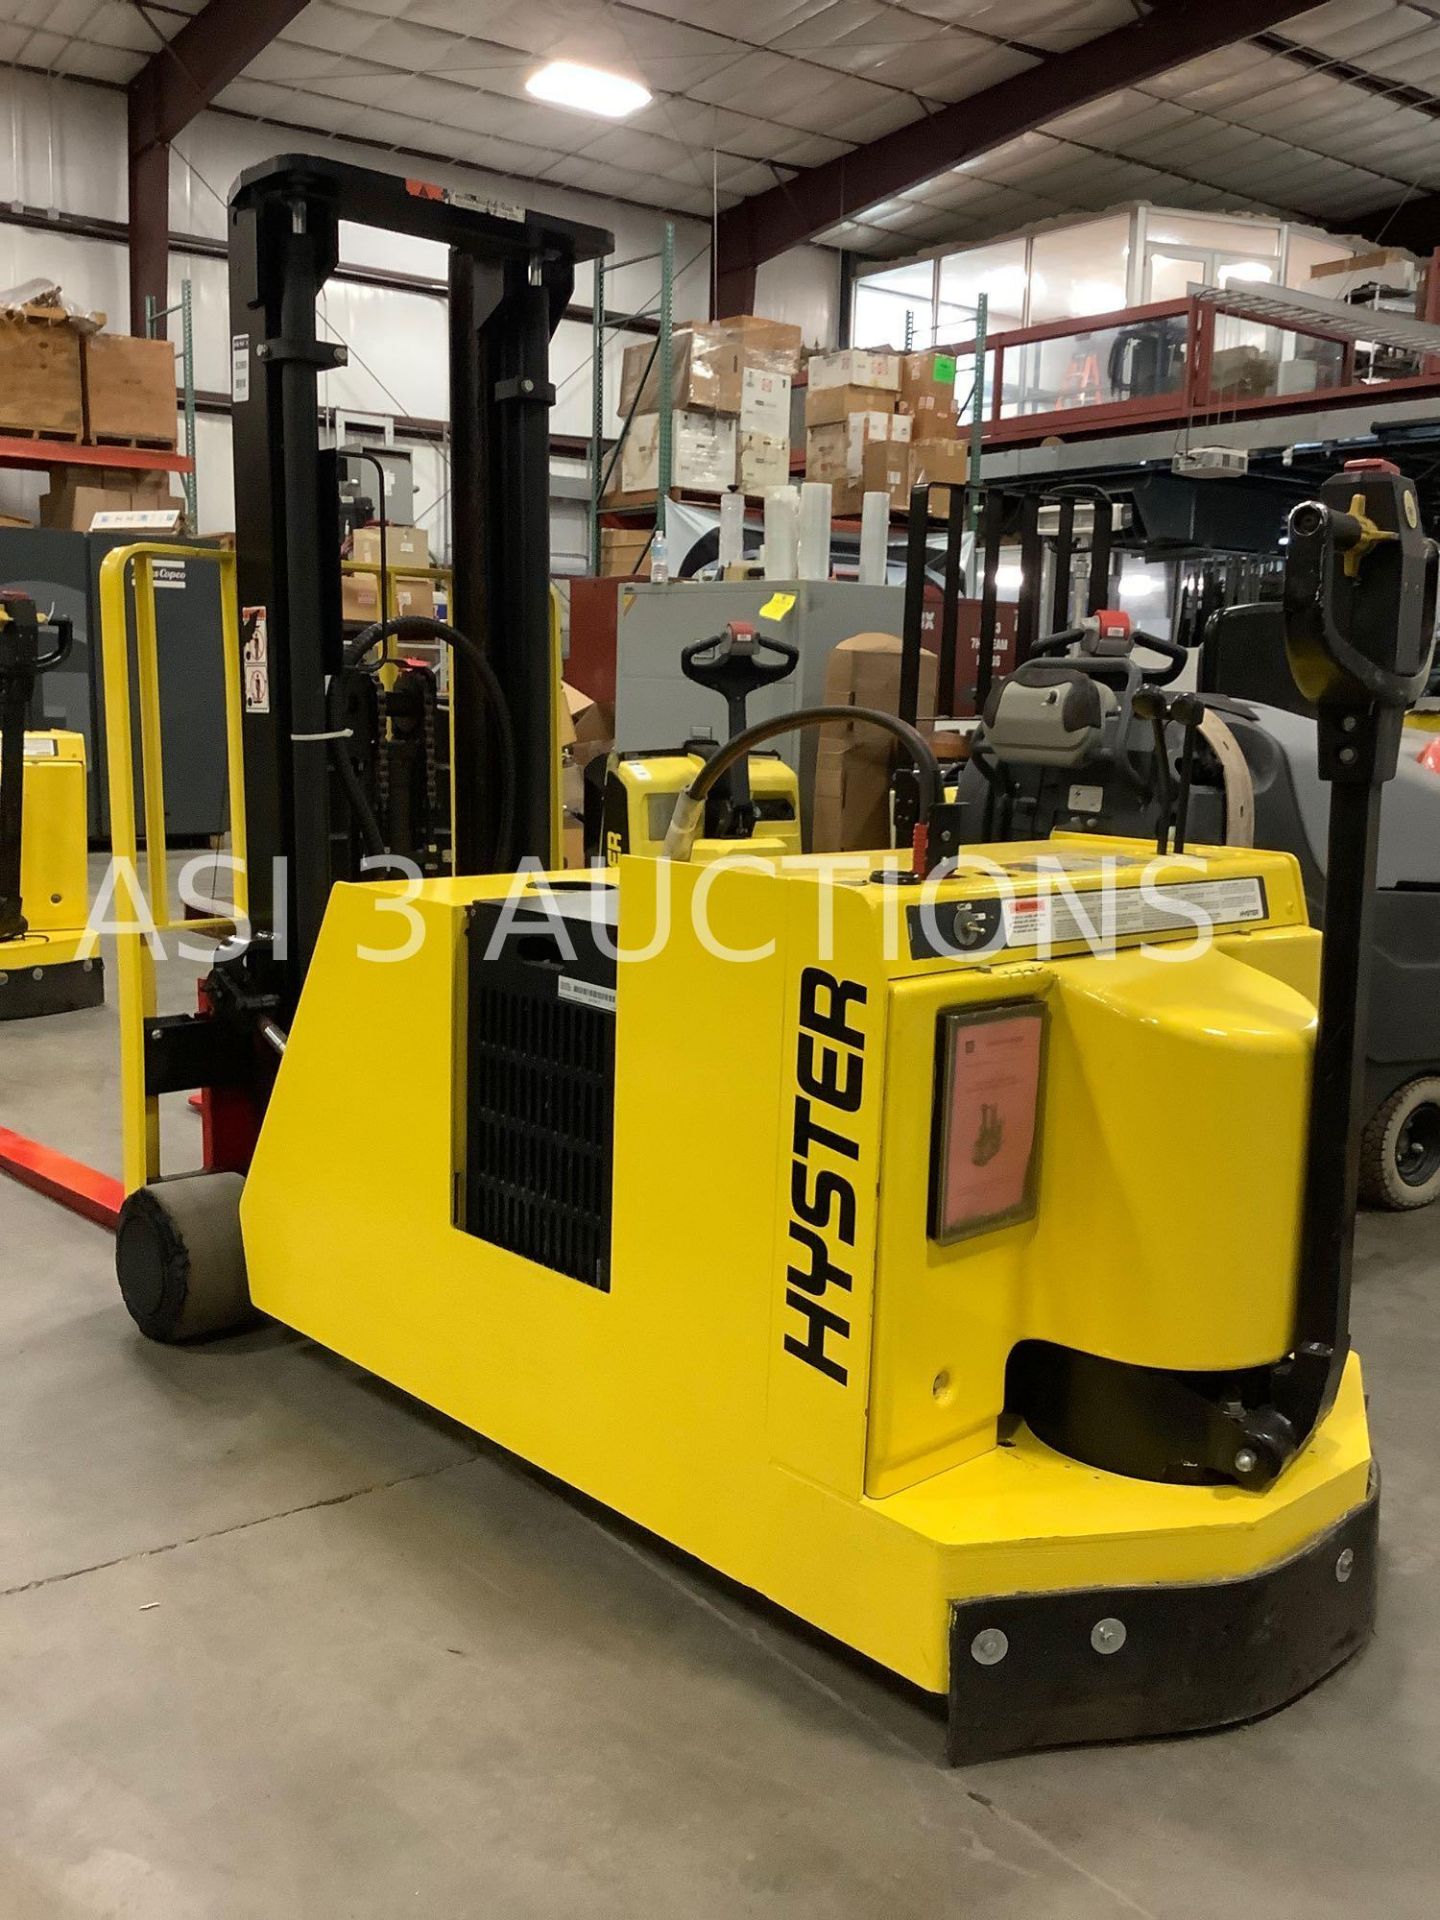 HYSTER ELECTRIC FORK LIFT TILT TRUCK MODEL W40XTC MAX CAPACITY 4000lbs LOAD HEIGHT 104.5 - Image 2 of 5